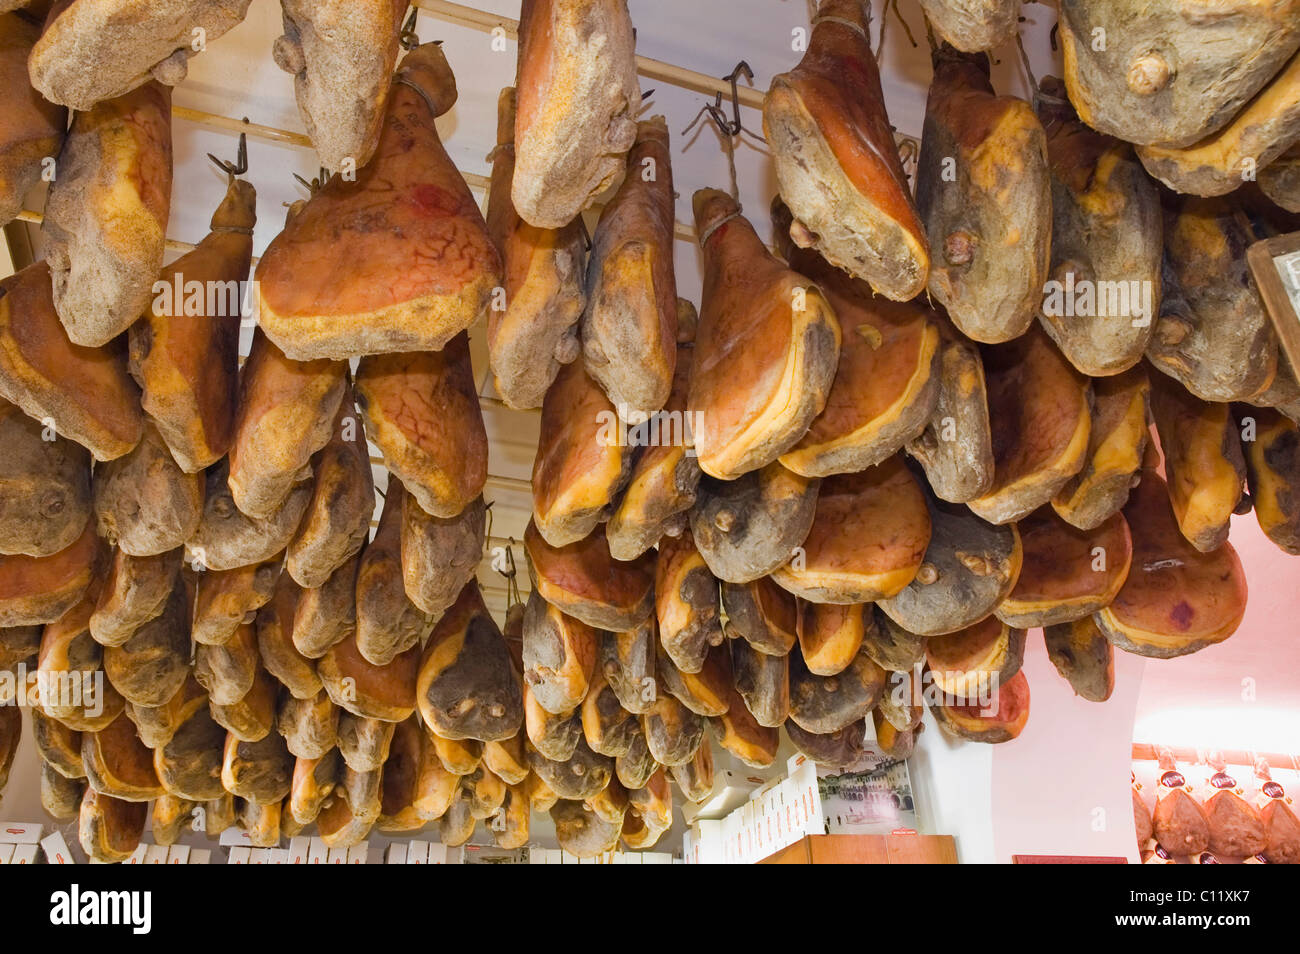 Ham hanging from the ceiling in the delicatessen shop, Norcineria Falorni, Greve, Chianti, Tuscany, Italy, Europe Stock Photo